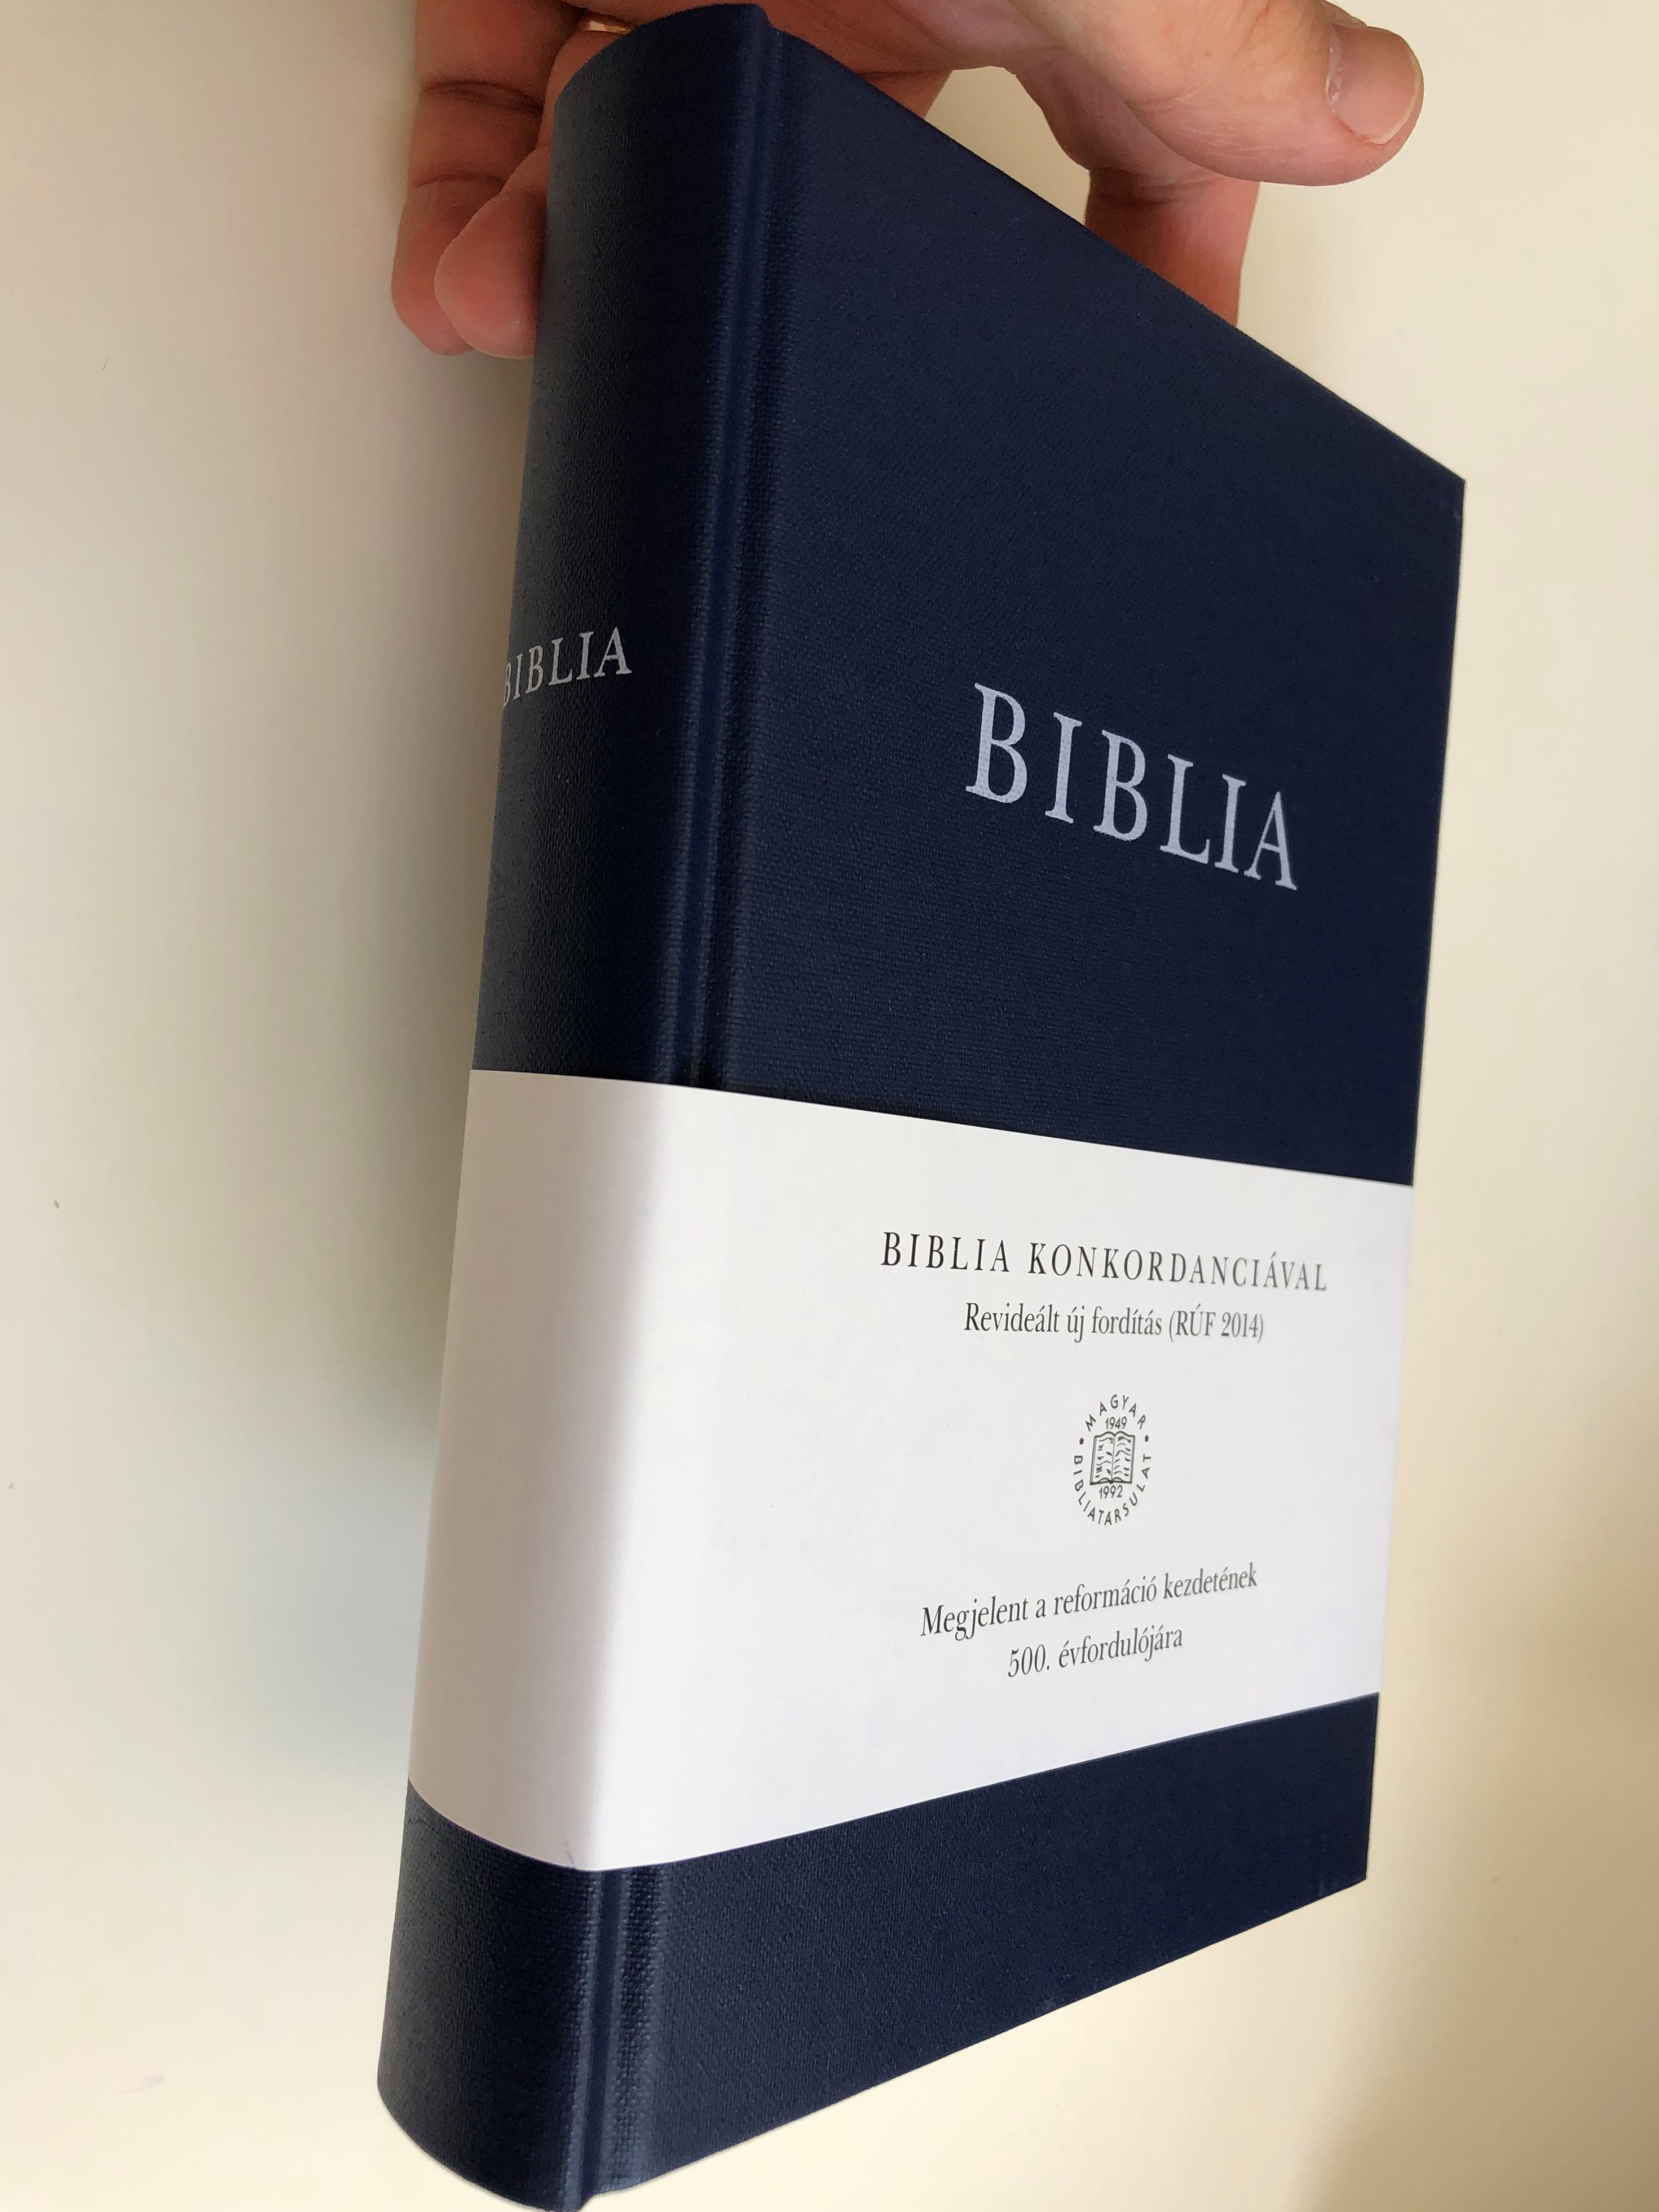 biblia-konkordanci-val-r-f-2014-hungarian-language-bible-with-concordance-published-on-the-500th-anniversary-of-the-reformation-hardcover-2017-color-maps-section-titles-mid-size-k-lvin-kiad-2-.jpg